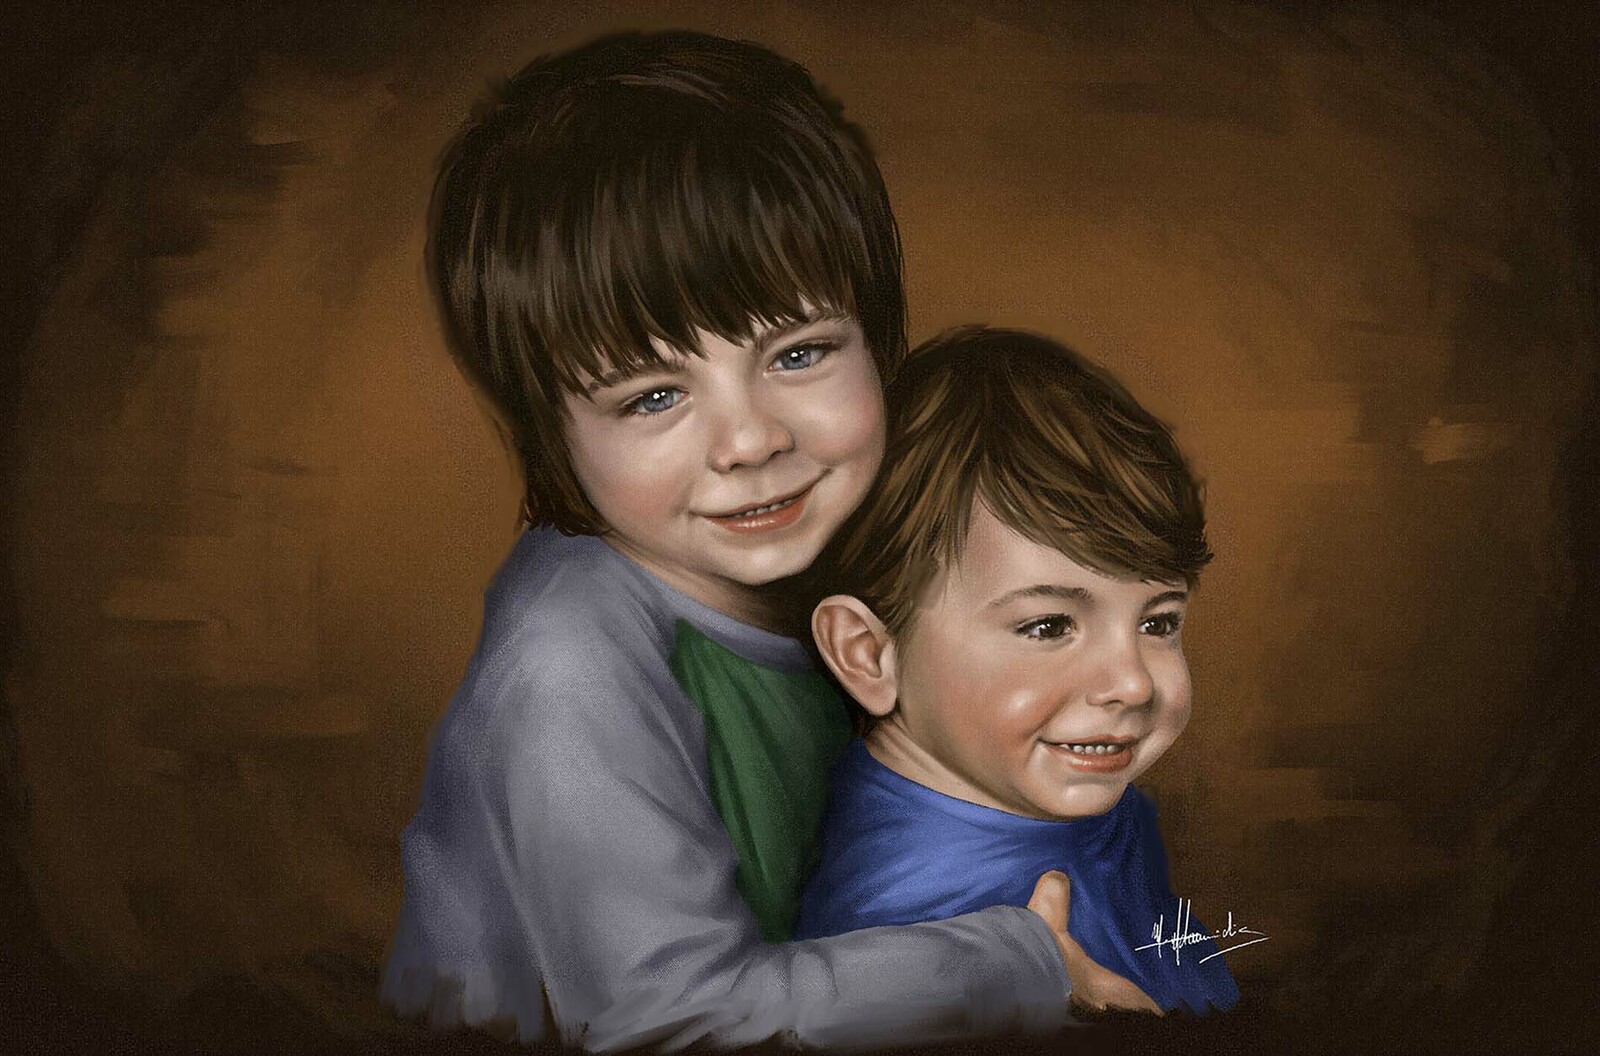 Digital Oil Portrait (realistic) Painting of two Children